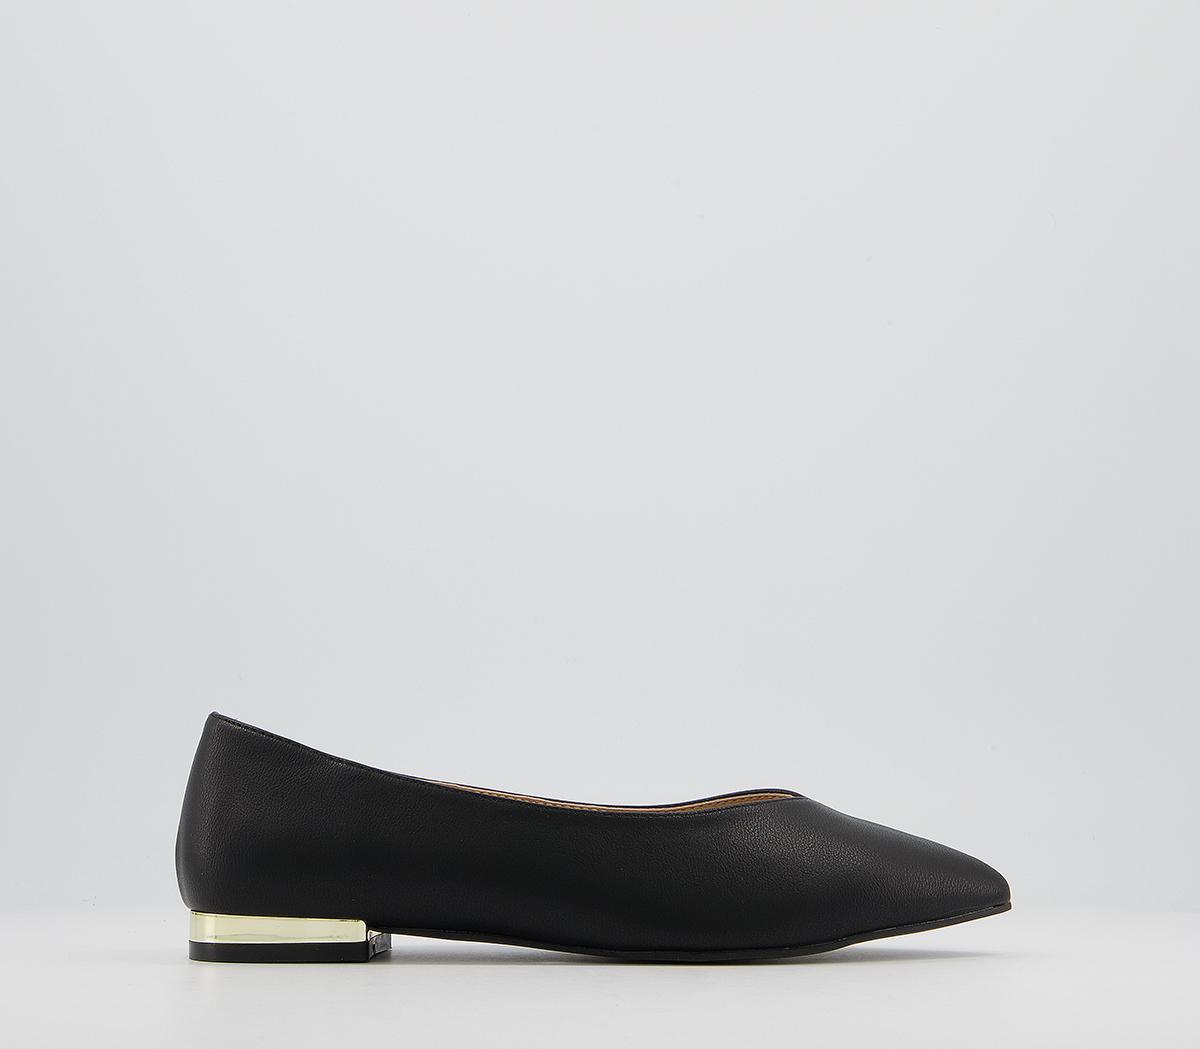 OFFICEFeathered Heel Clip Pointed PumpsBlack With Gold Heel Clip